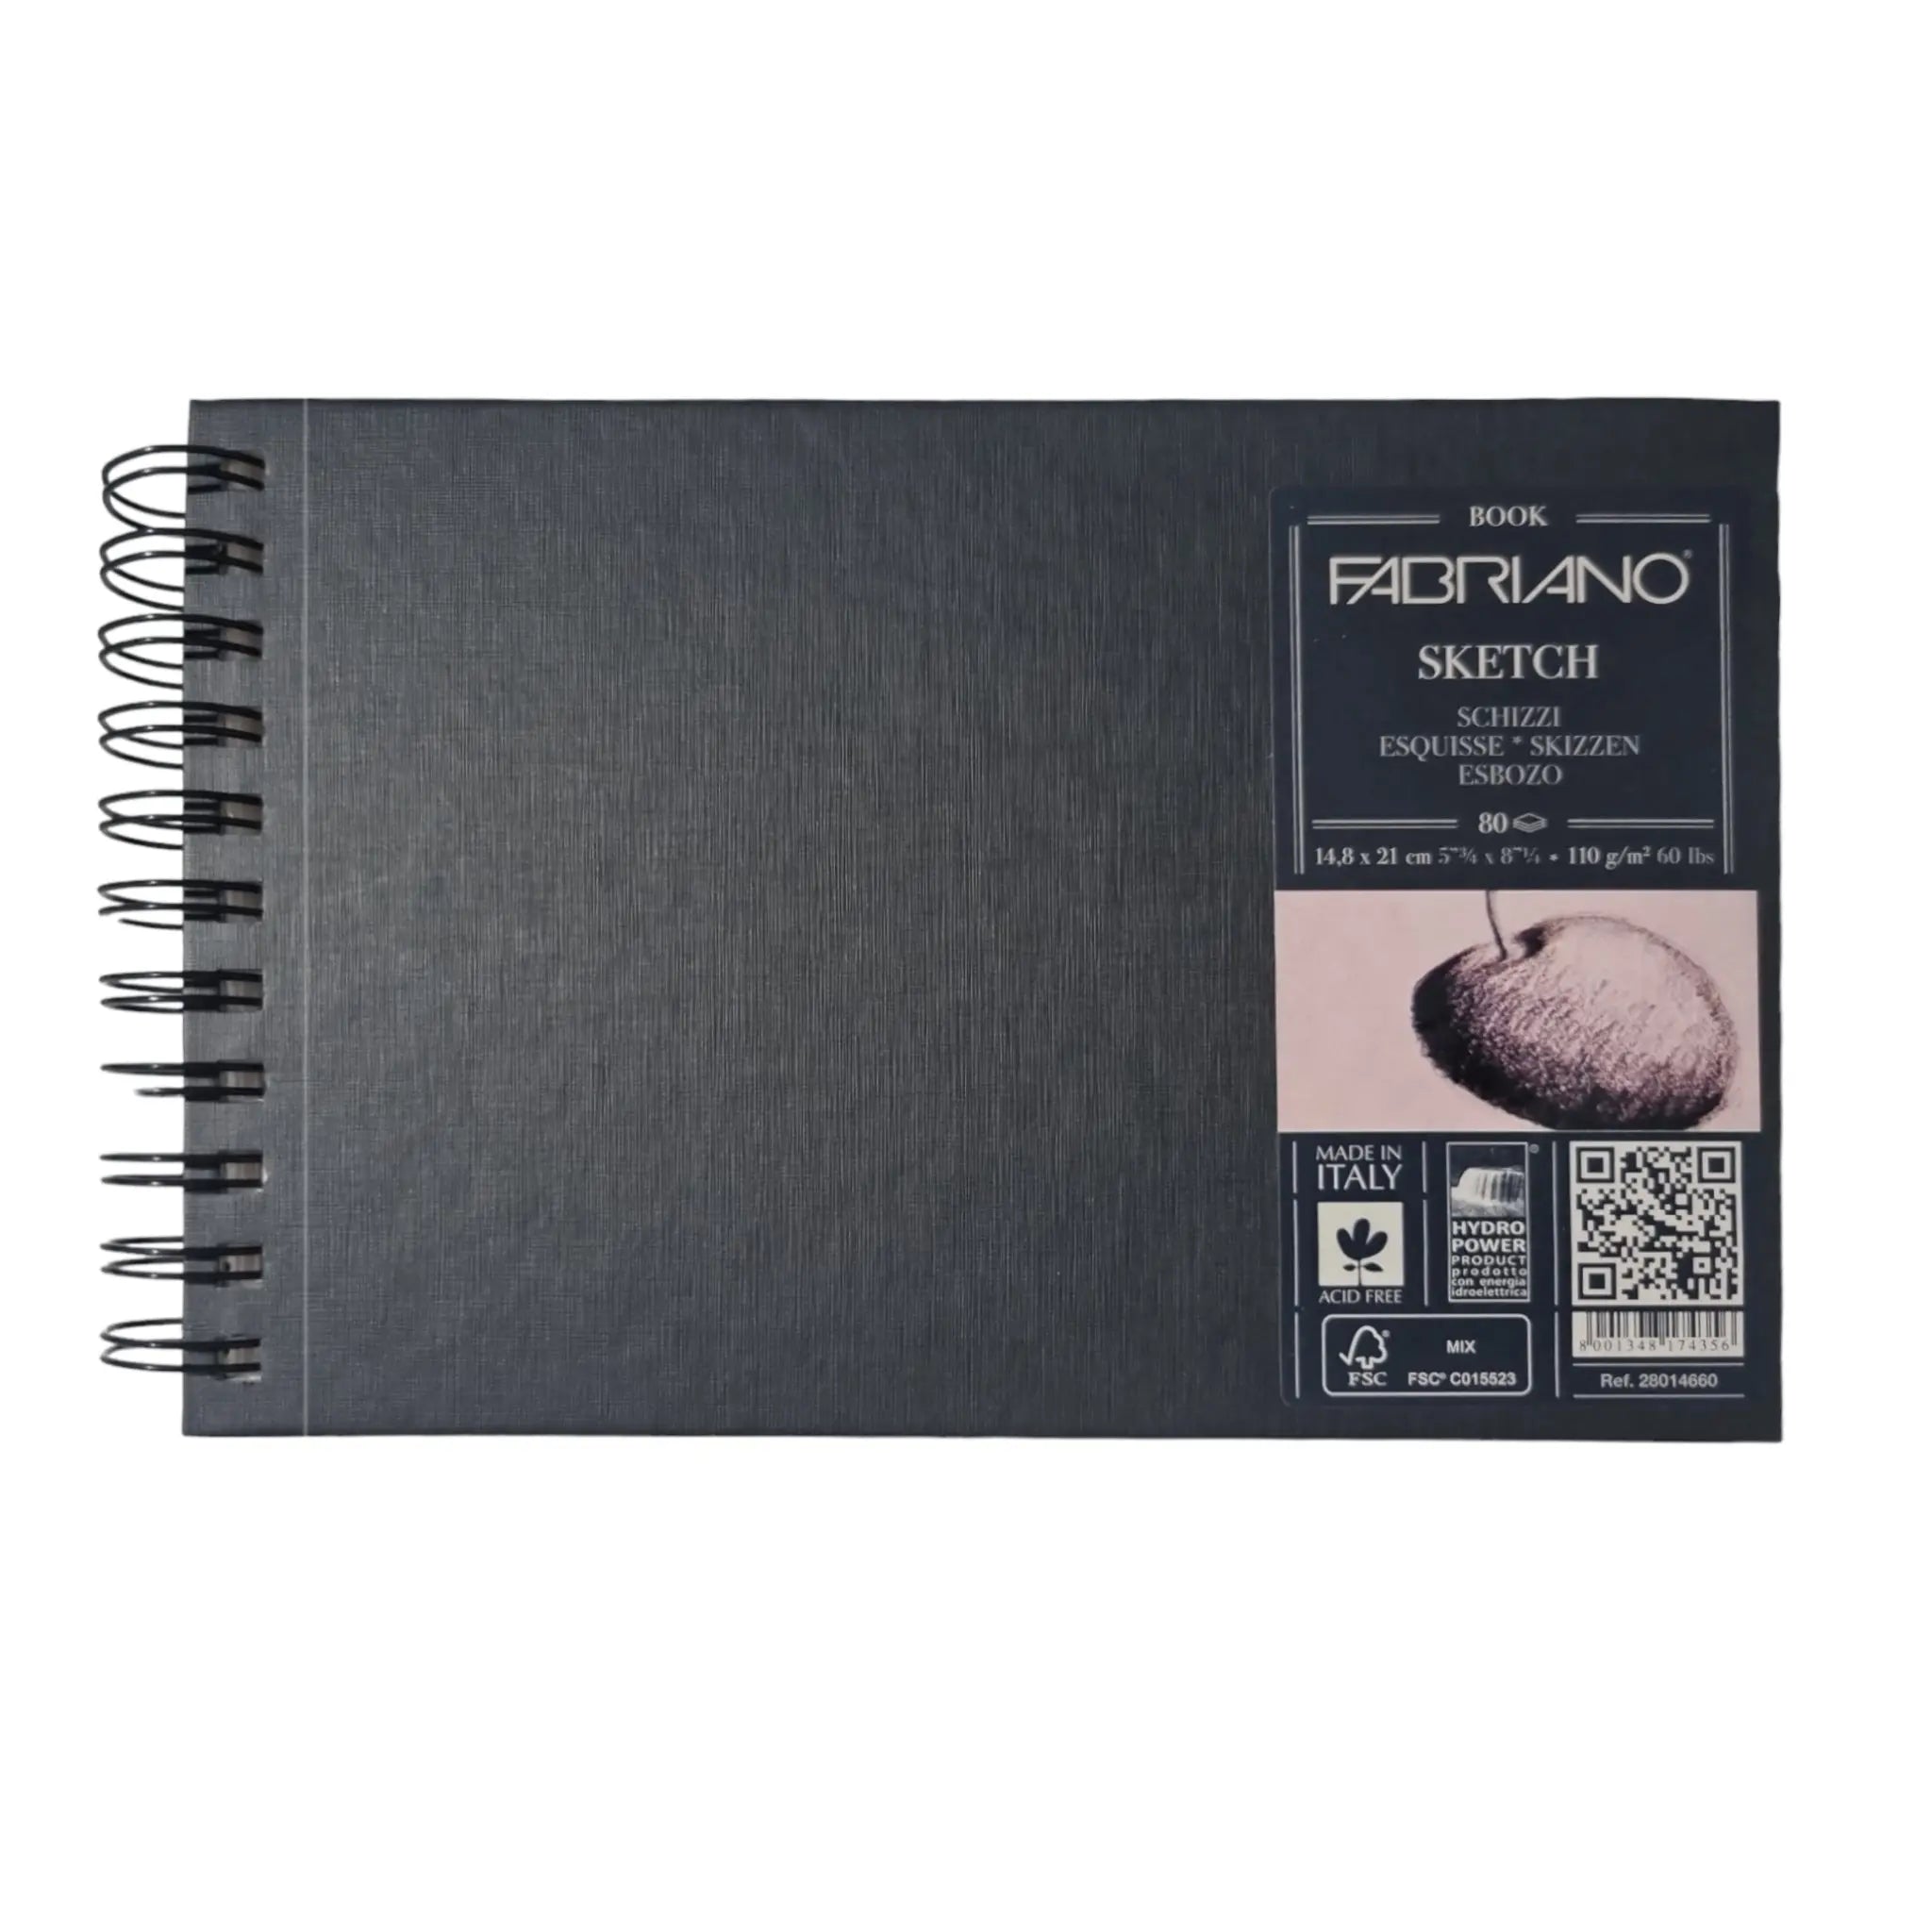 SKYGOLD 11.5X16.5 50 SHEETS 140GSM ANUPAM OXFORD SKETCH BOOK FOR